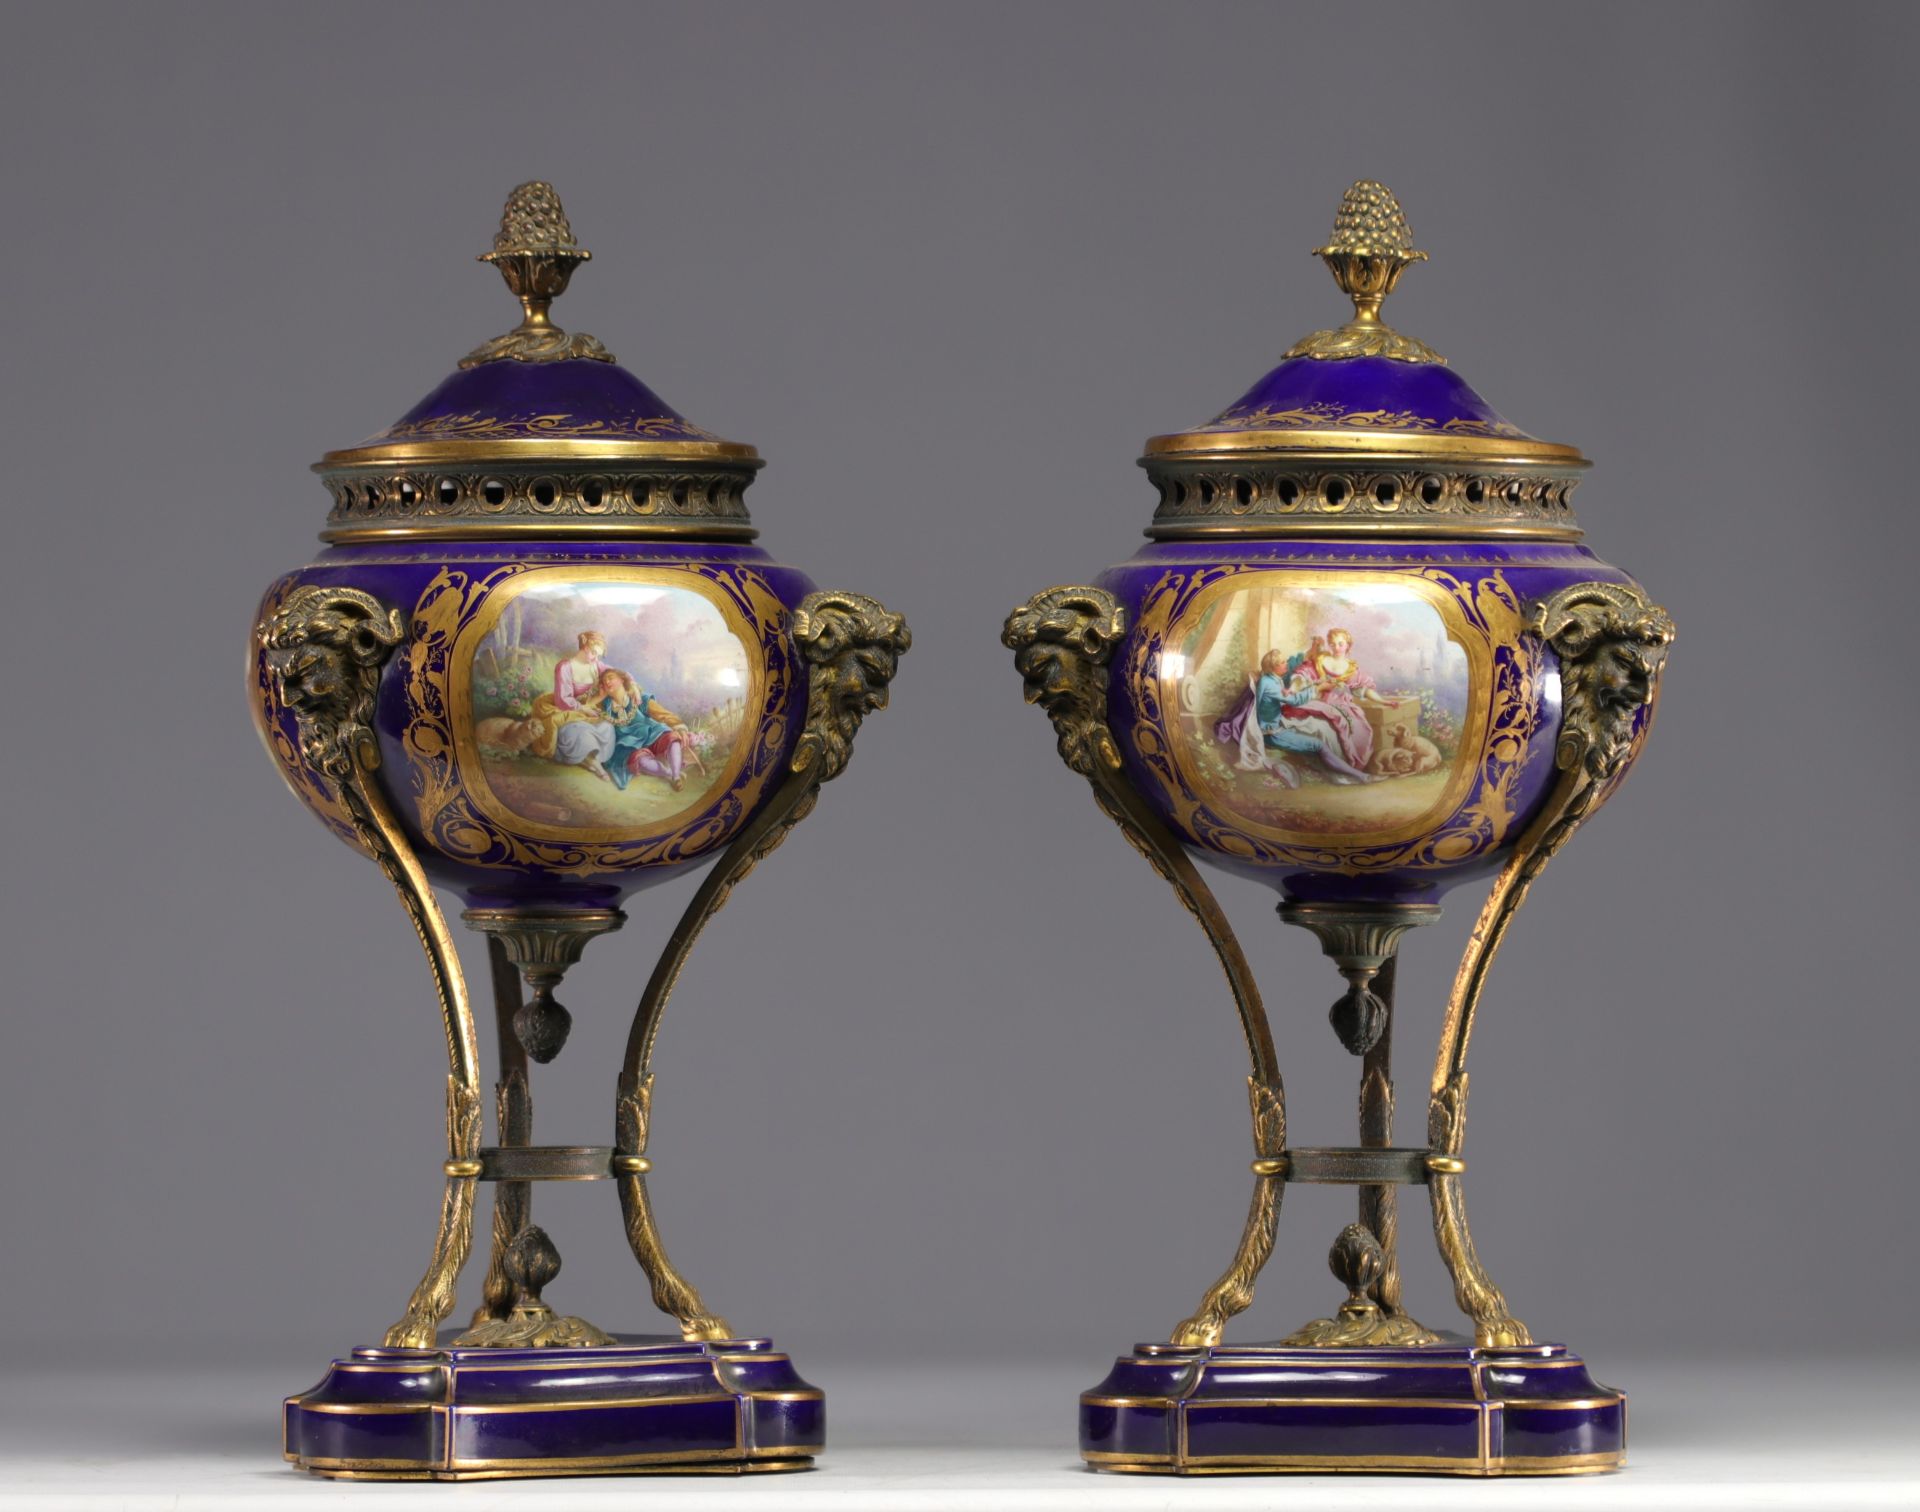 Pair of Sevres porcelain cassolettes decorated with gallant scenes, mounted on bronze. - Image 5 of 5